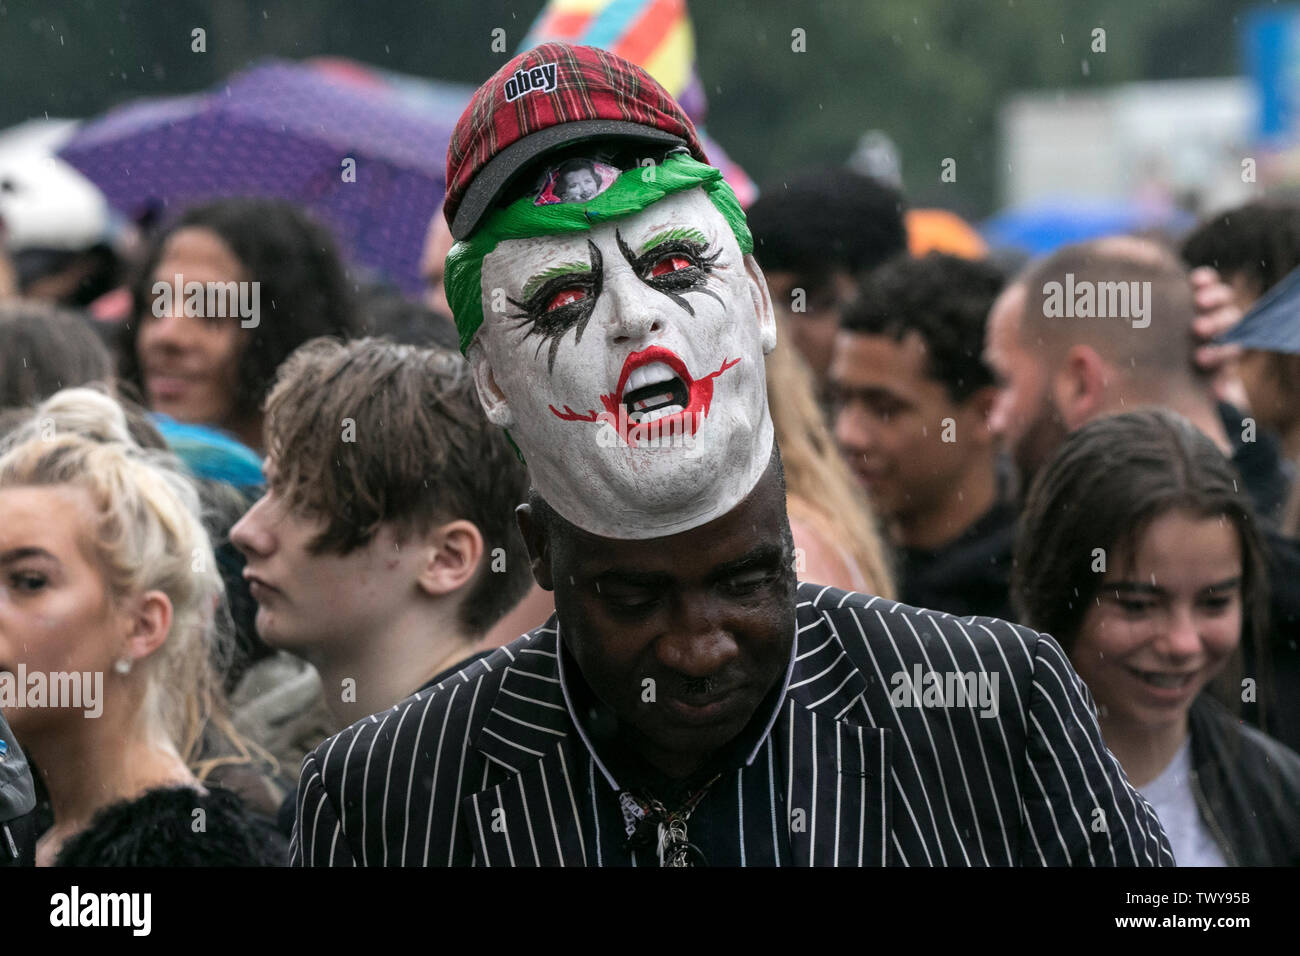 A man wears a joker mask from the hollywood batman movie franchise Stock Photo